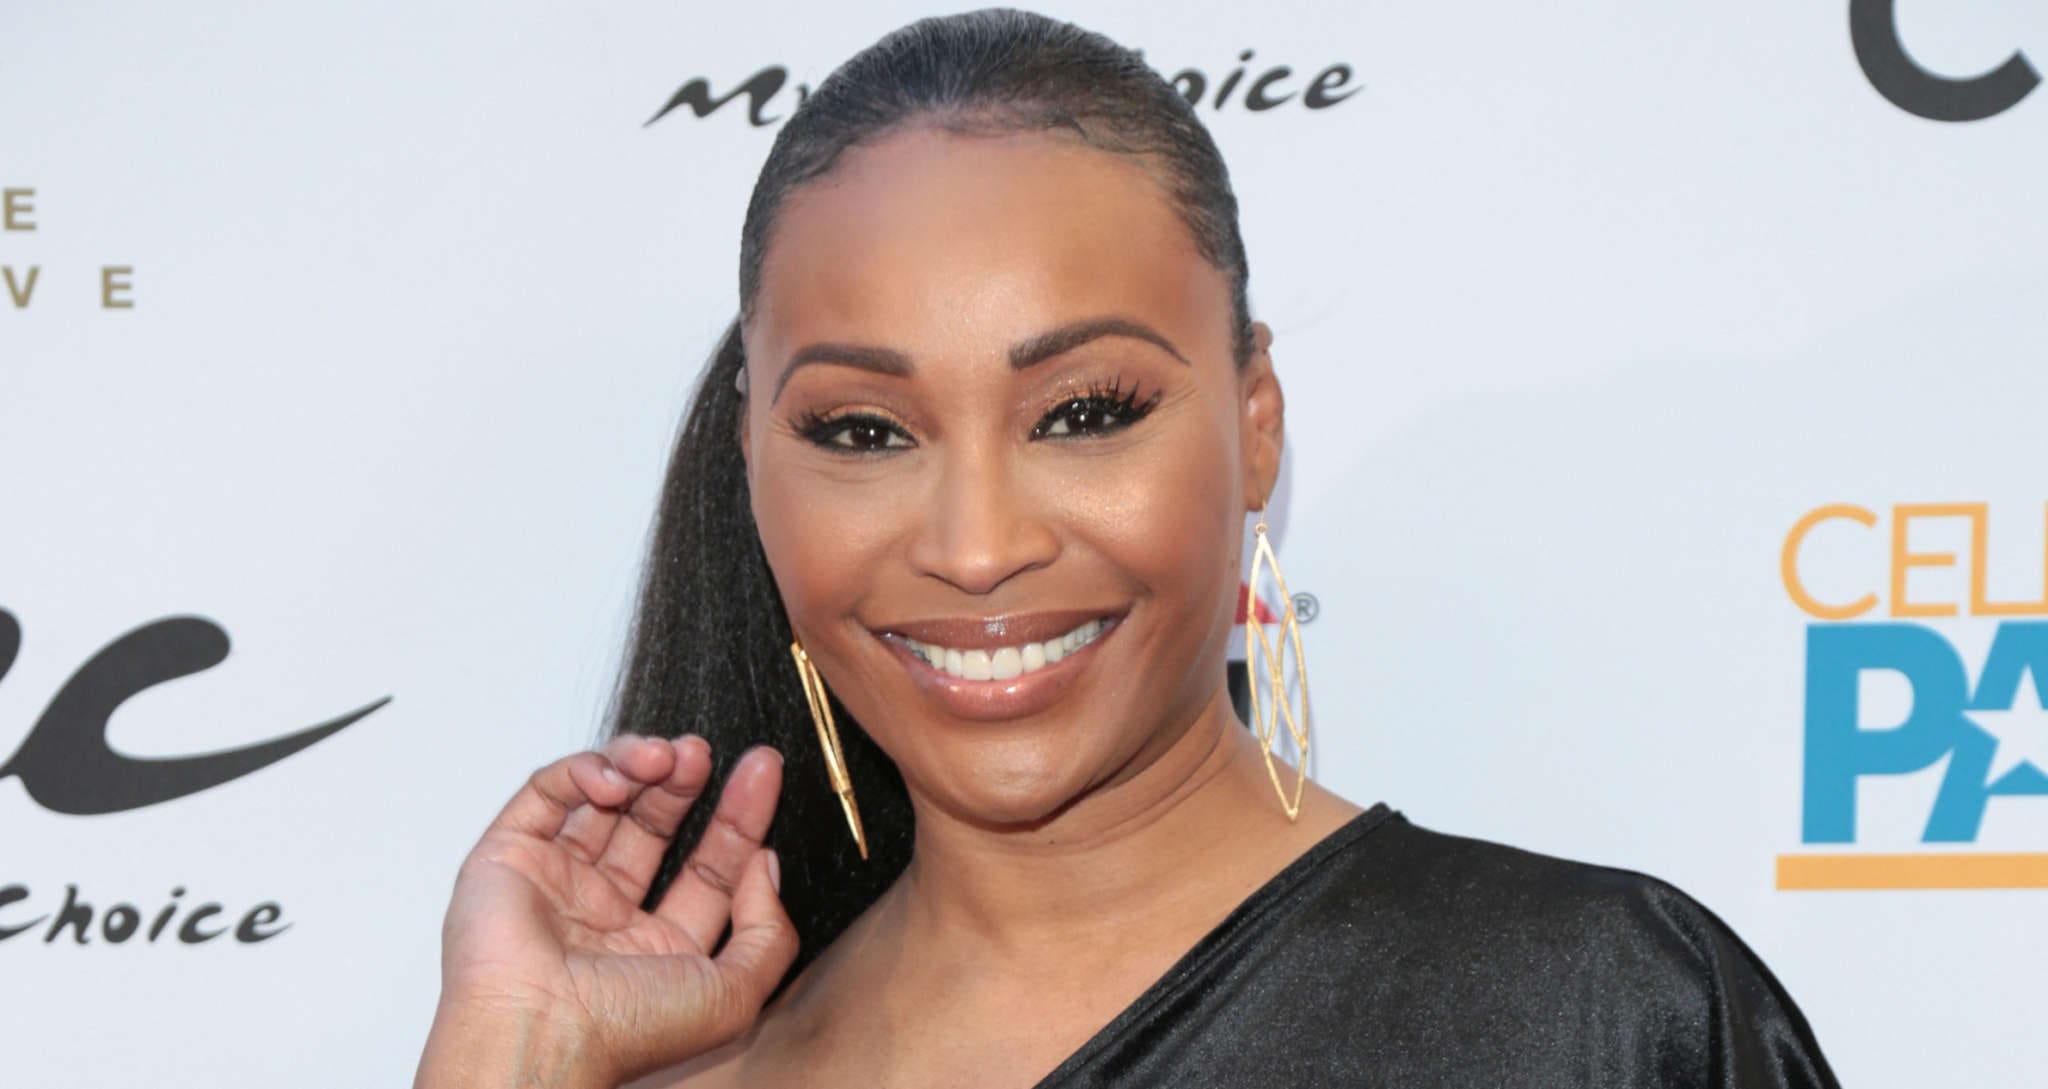 Cynthia Bailey Has A 'Wifey Glow' And Looks Gorgeous In This Floral Dress